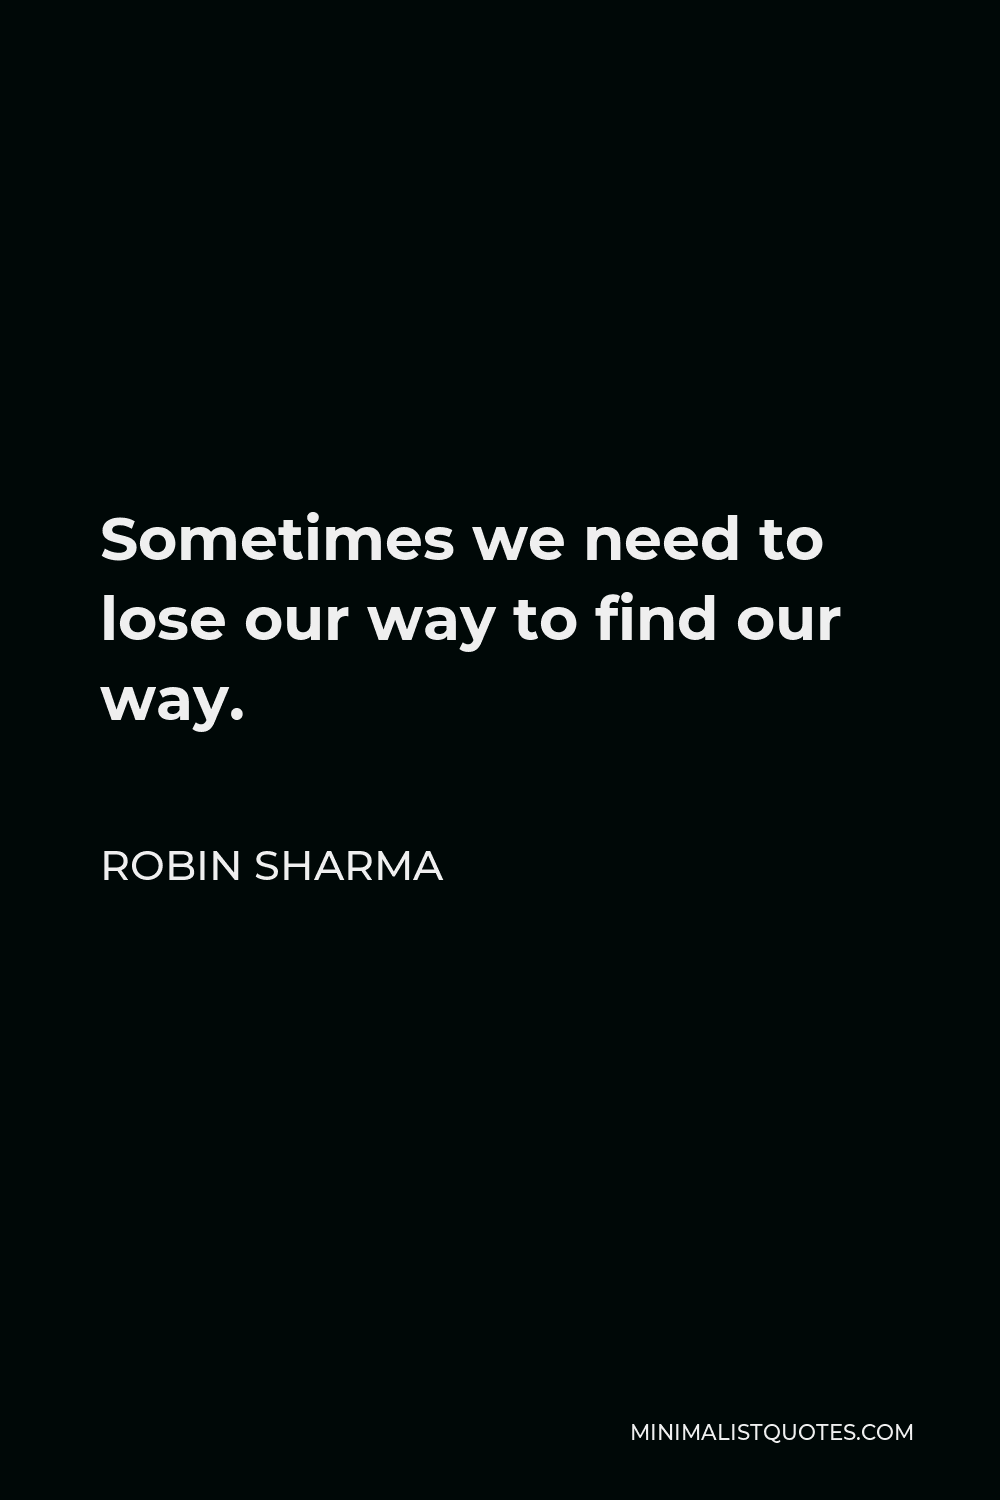 Robin Sharma Quote - Sometimes we need to lose our way to find our way.